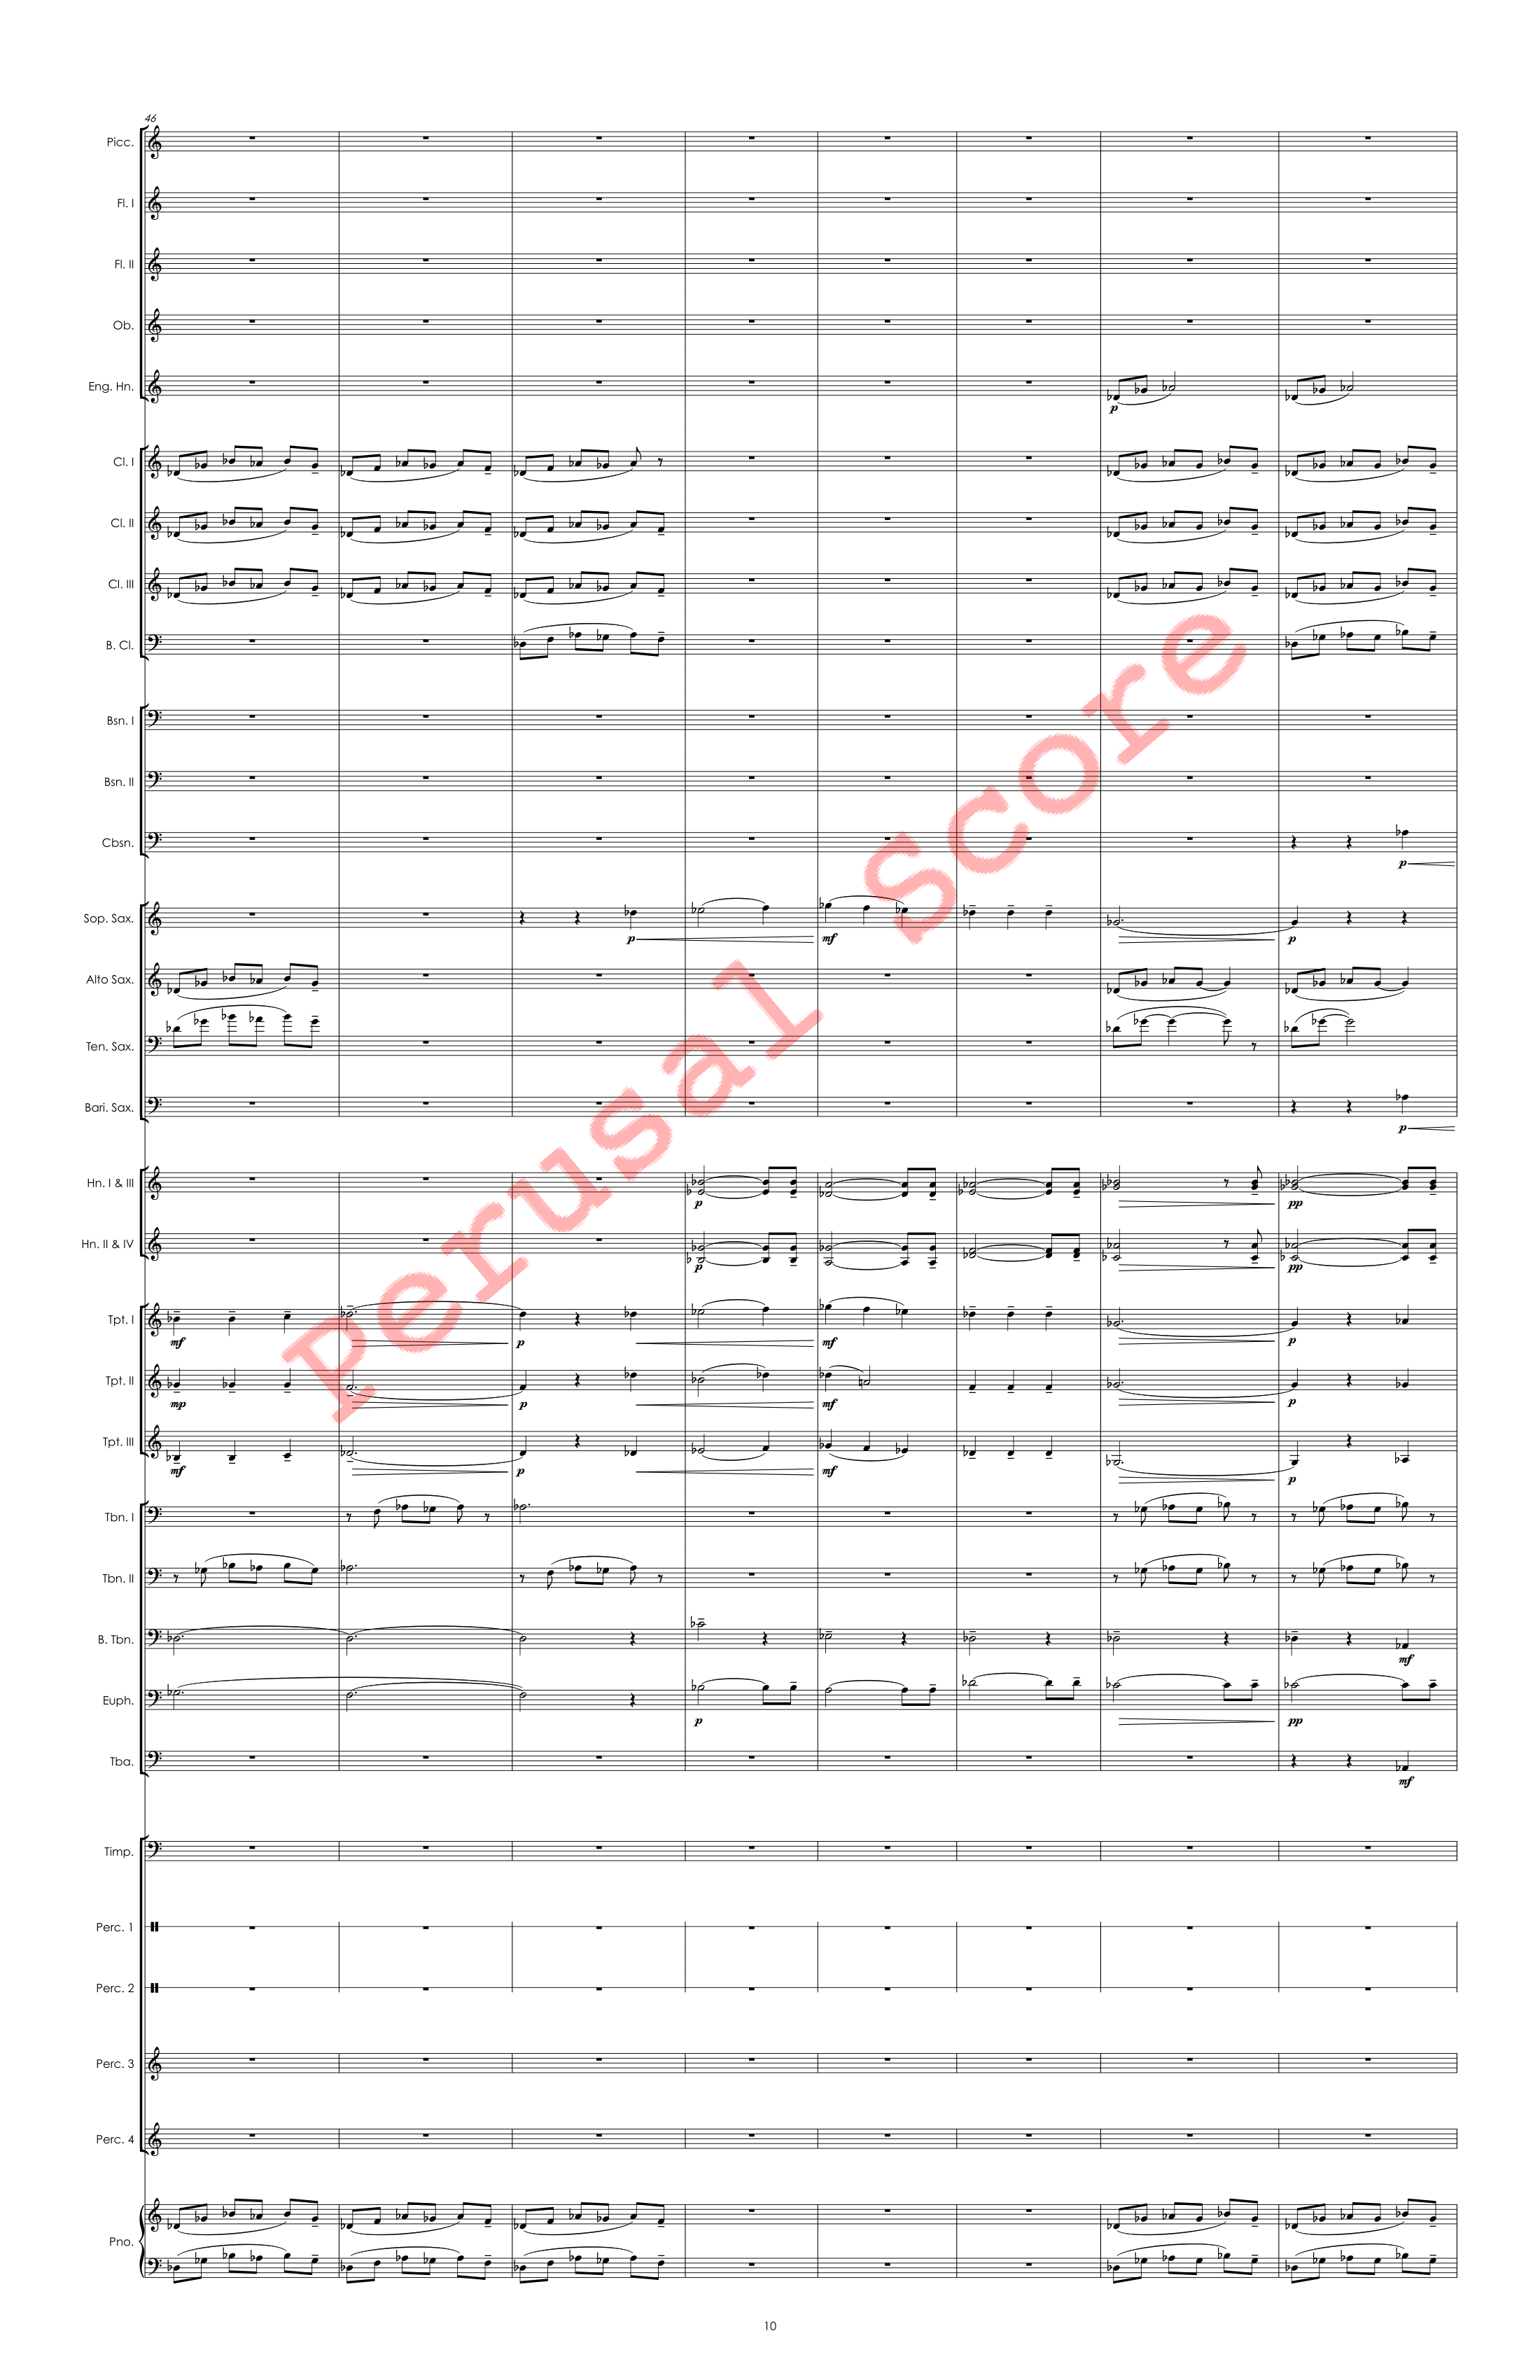 Canadian Folk Song - FINISHED 4.18.23- Full Score perusal score-10.png